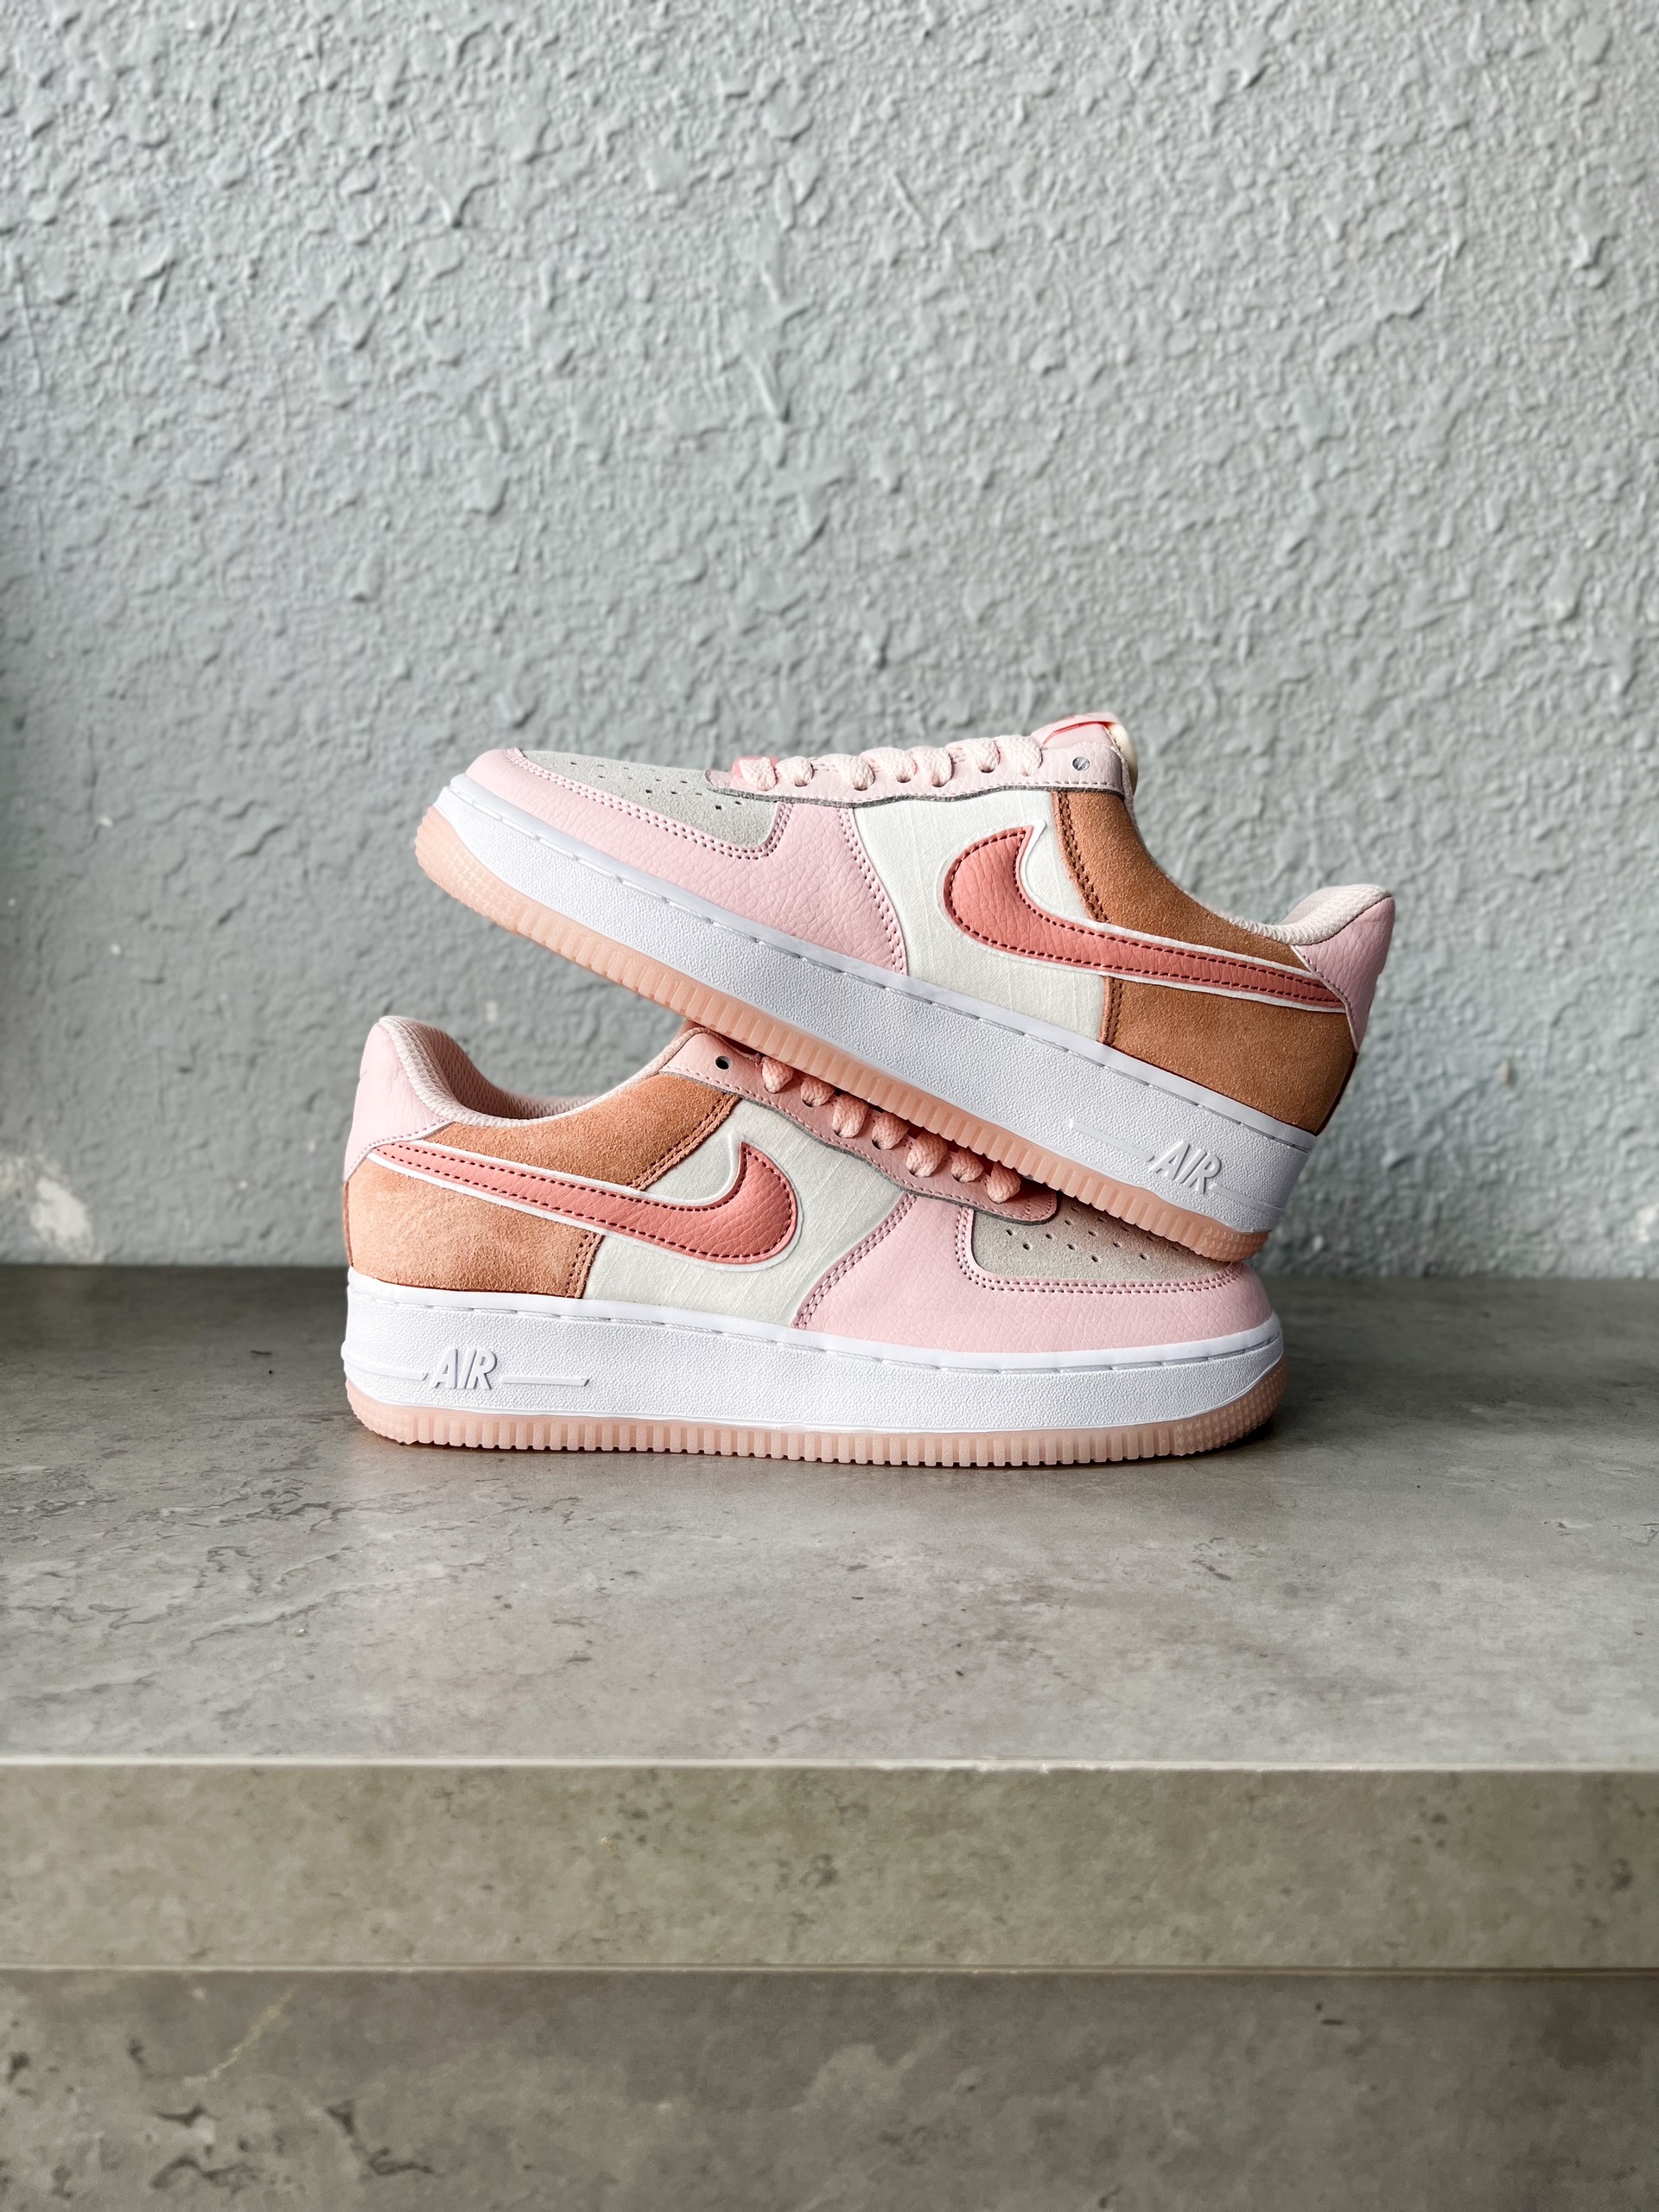 Nike Air Force 1 07 Low premium Washed Coral 1:1